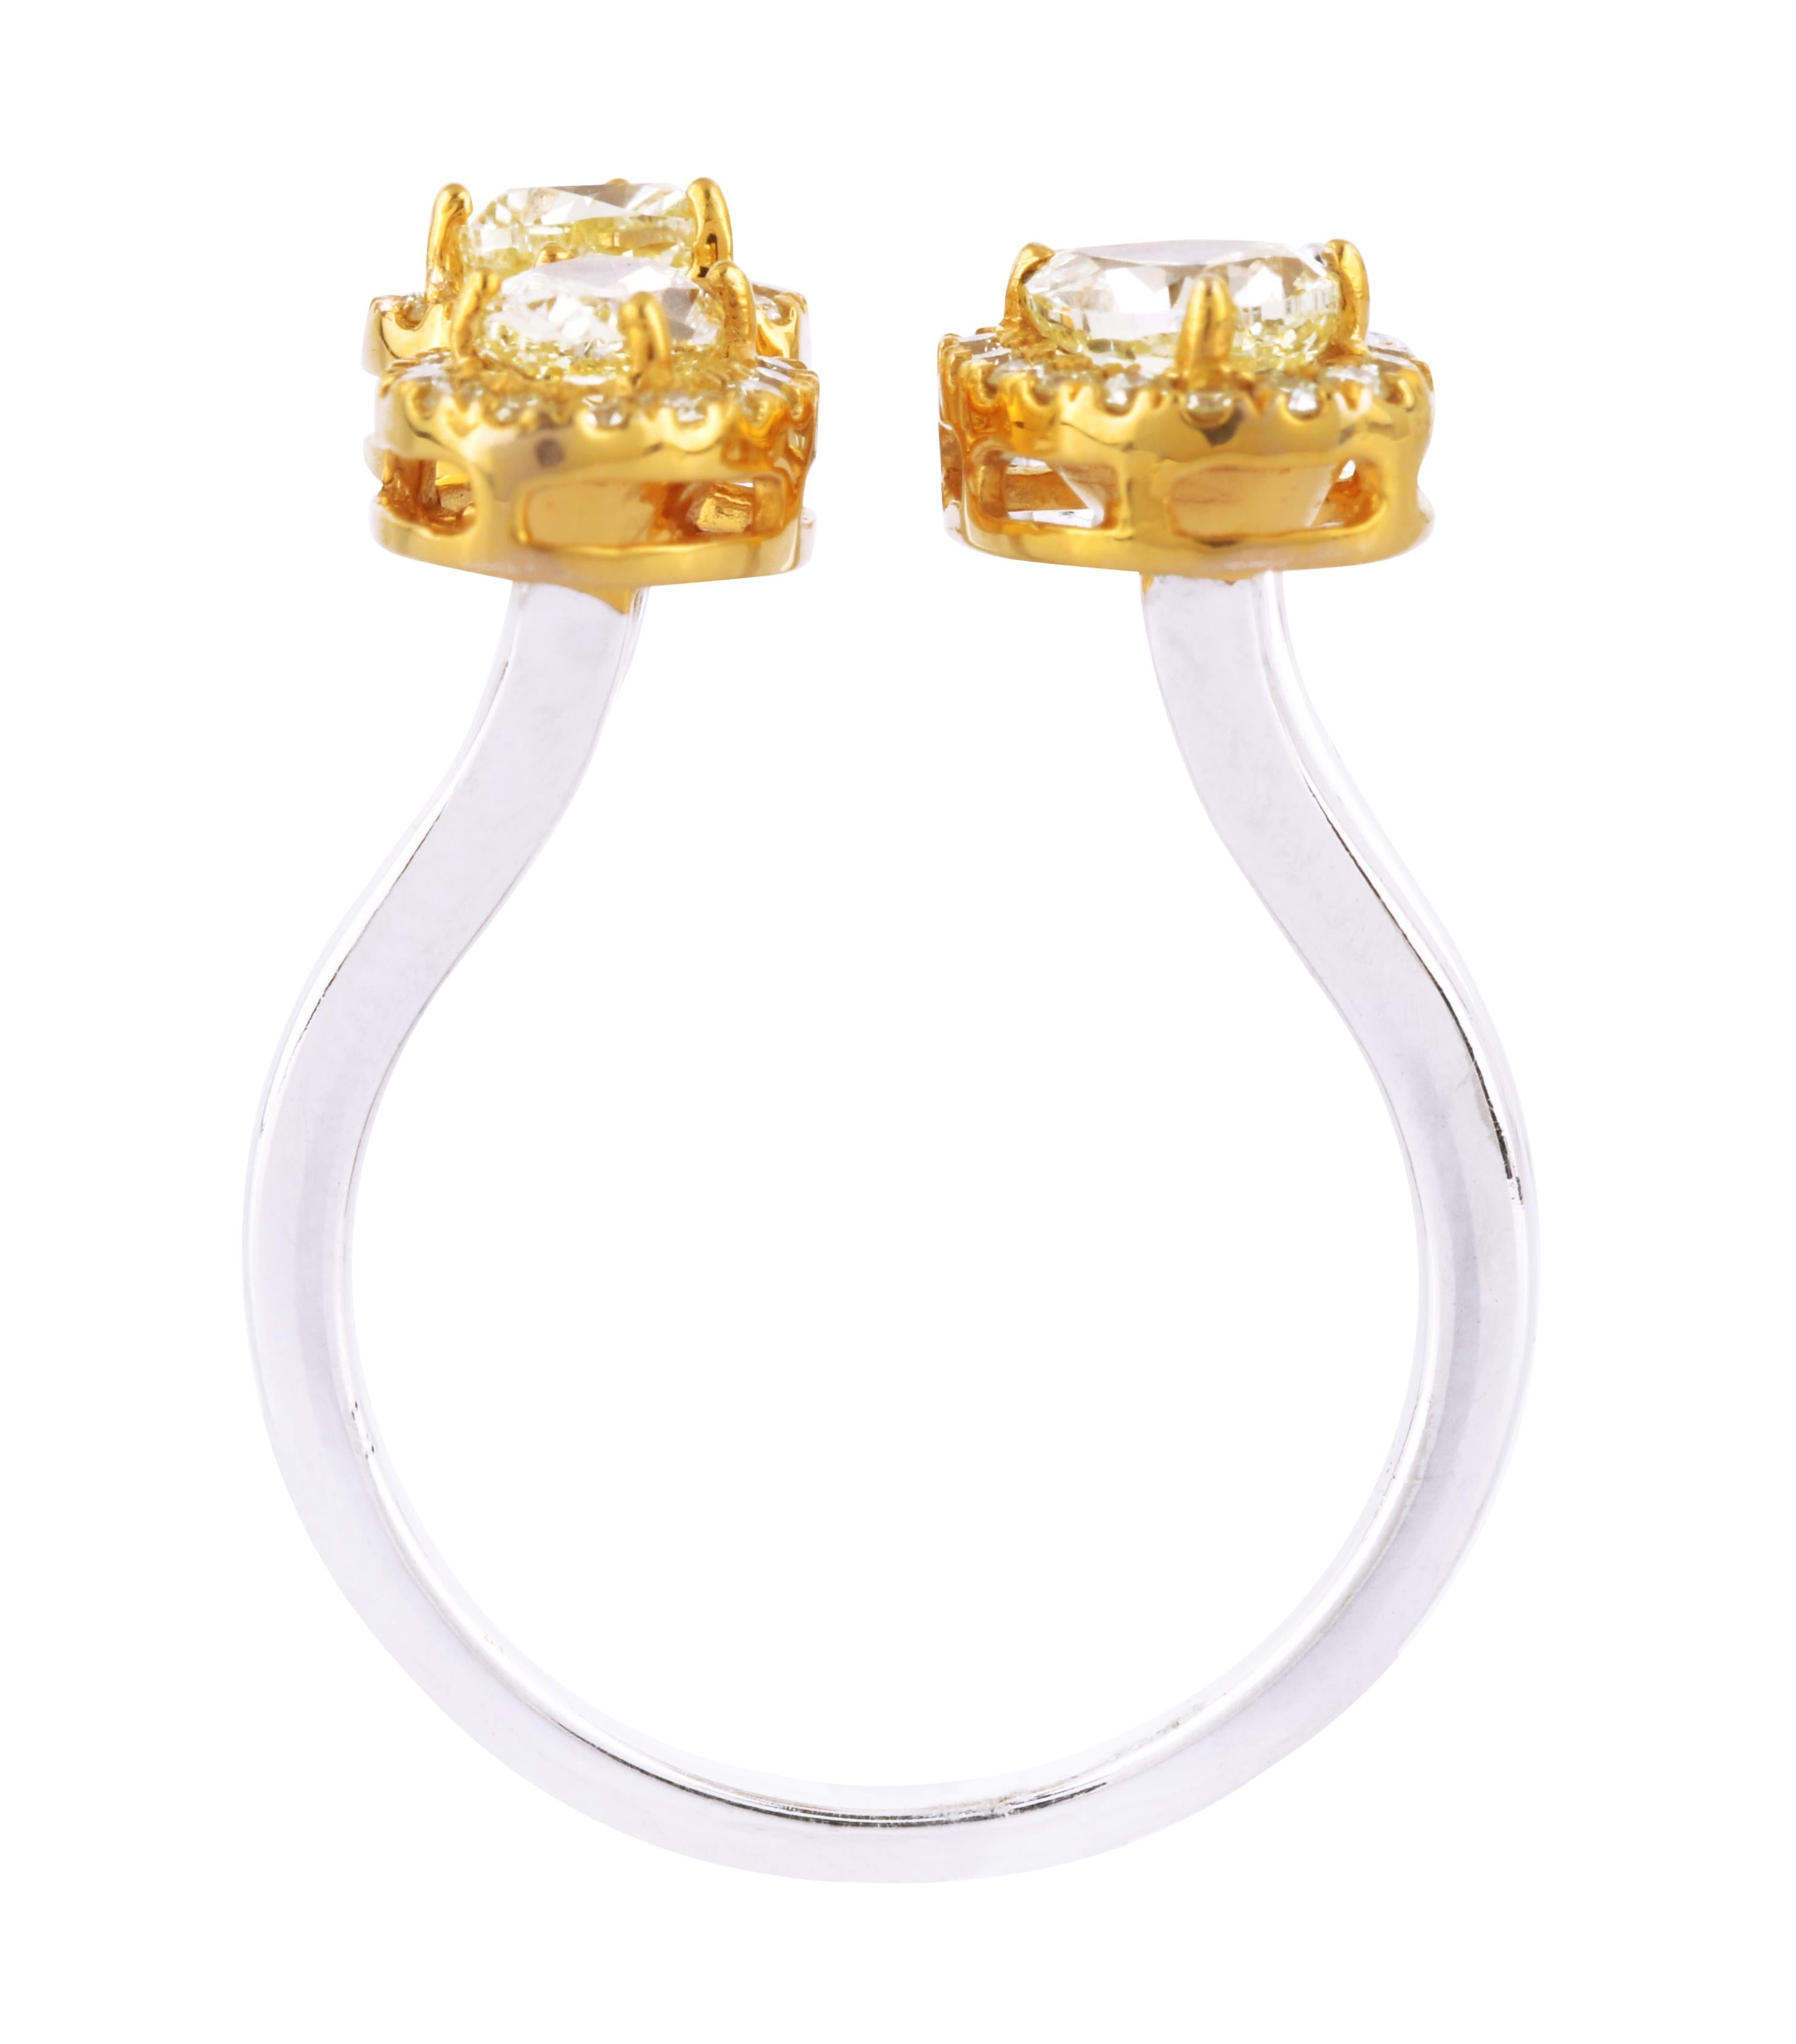 Women's 18 Karat Gold 1.73 Carat White and Fancy Yellow Diamond Cocktail Ring For Sale